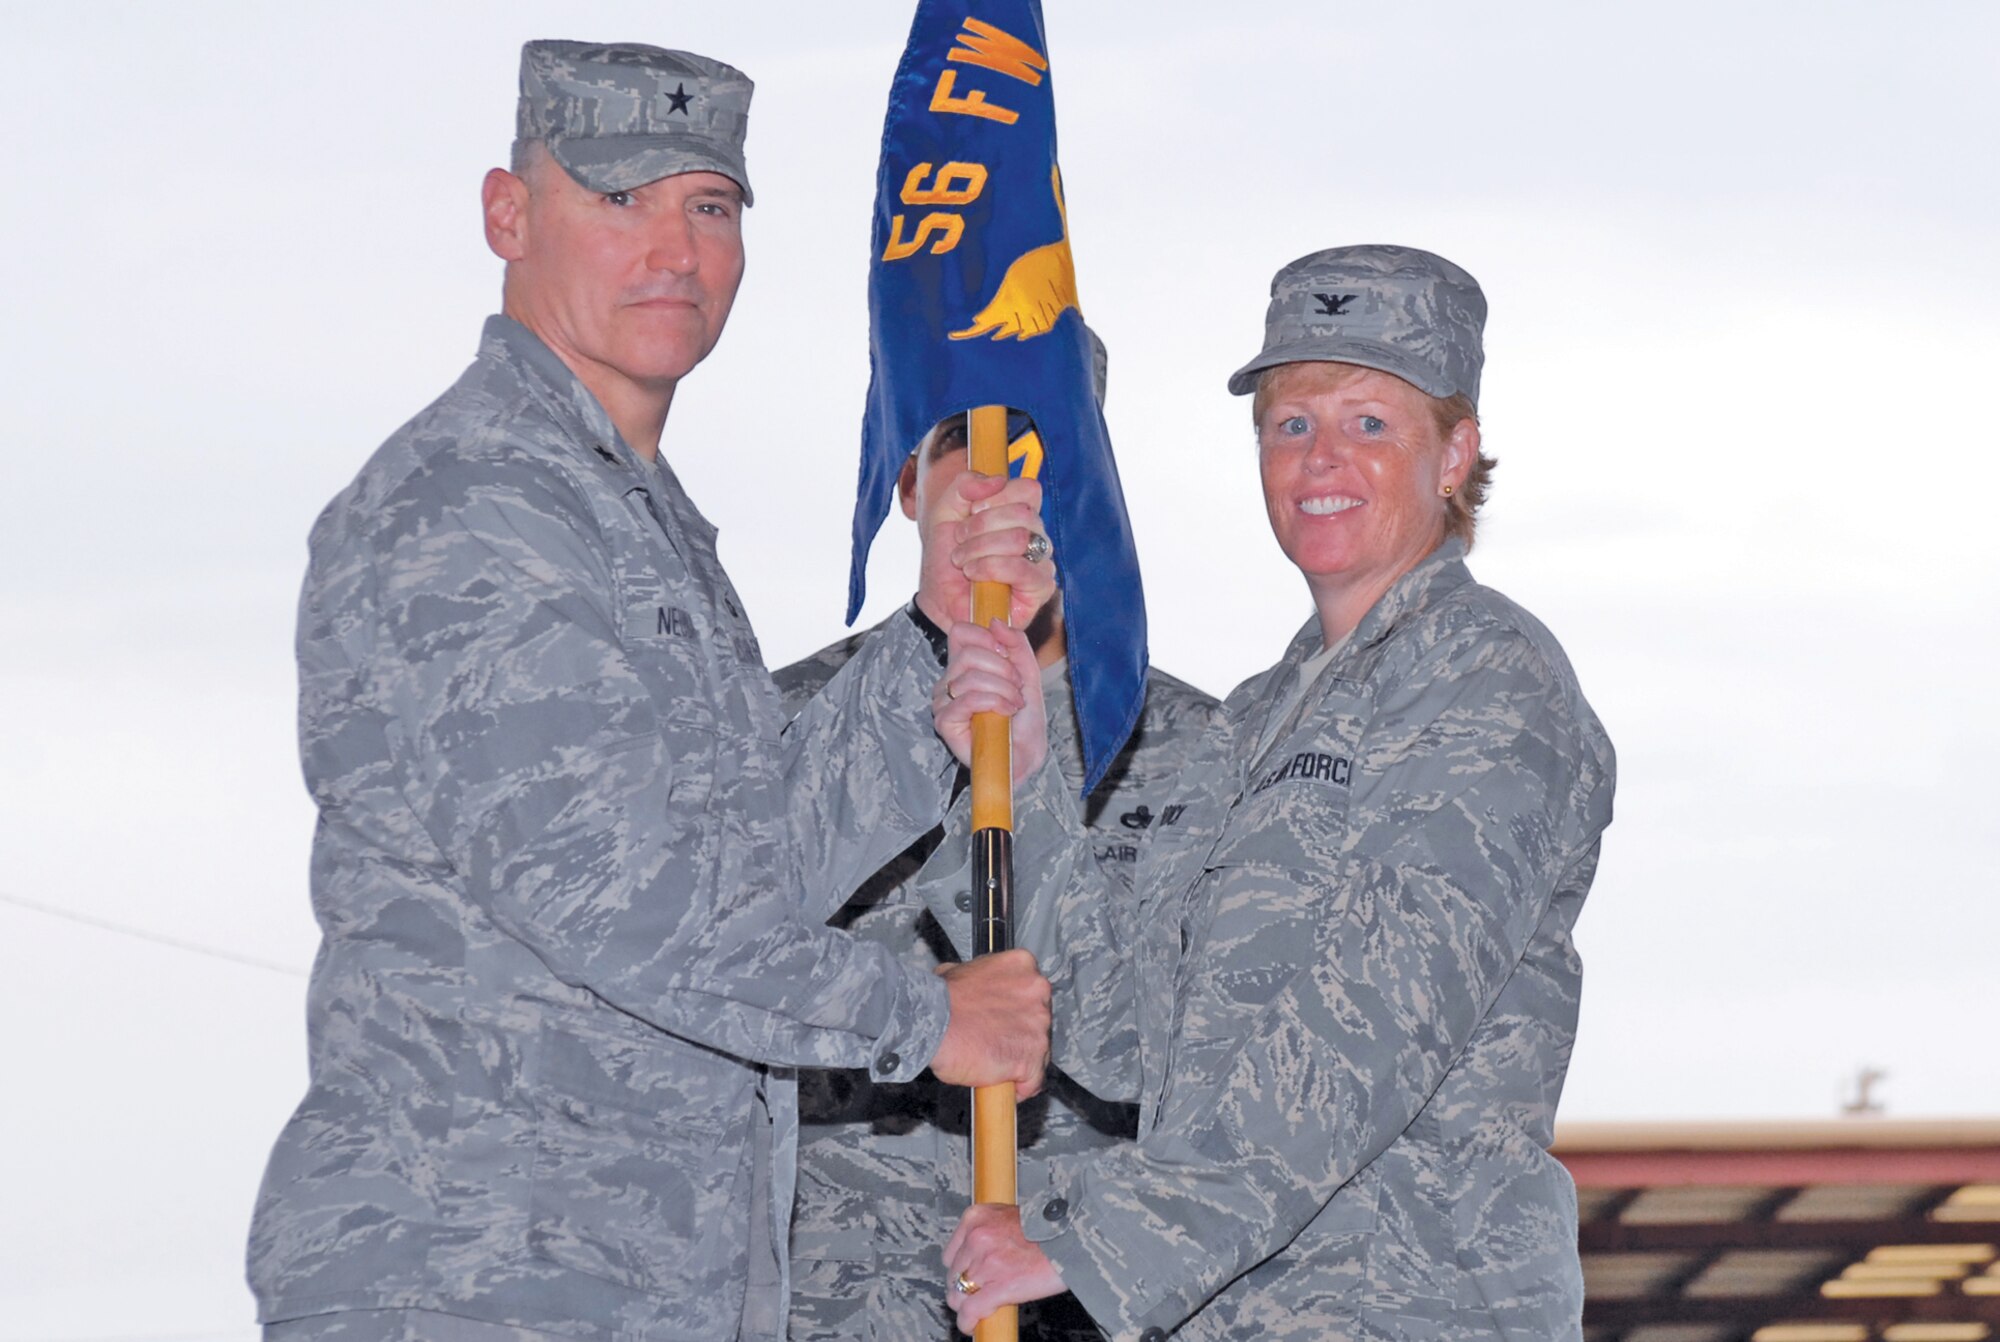 Brig. Gen. Kurt Neubauer, 56th Fighter Wing commander, passes the guidon to Col. Deborah Liddick, incoming 56th  Maintenance Group commander, July 23th during a change-of-command ceremony held in Hangar 913 on Luke Air Force Base, Arizona.  (U.S. Air Force photo/Airman 1st Class Sandra Welch)